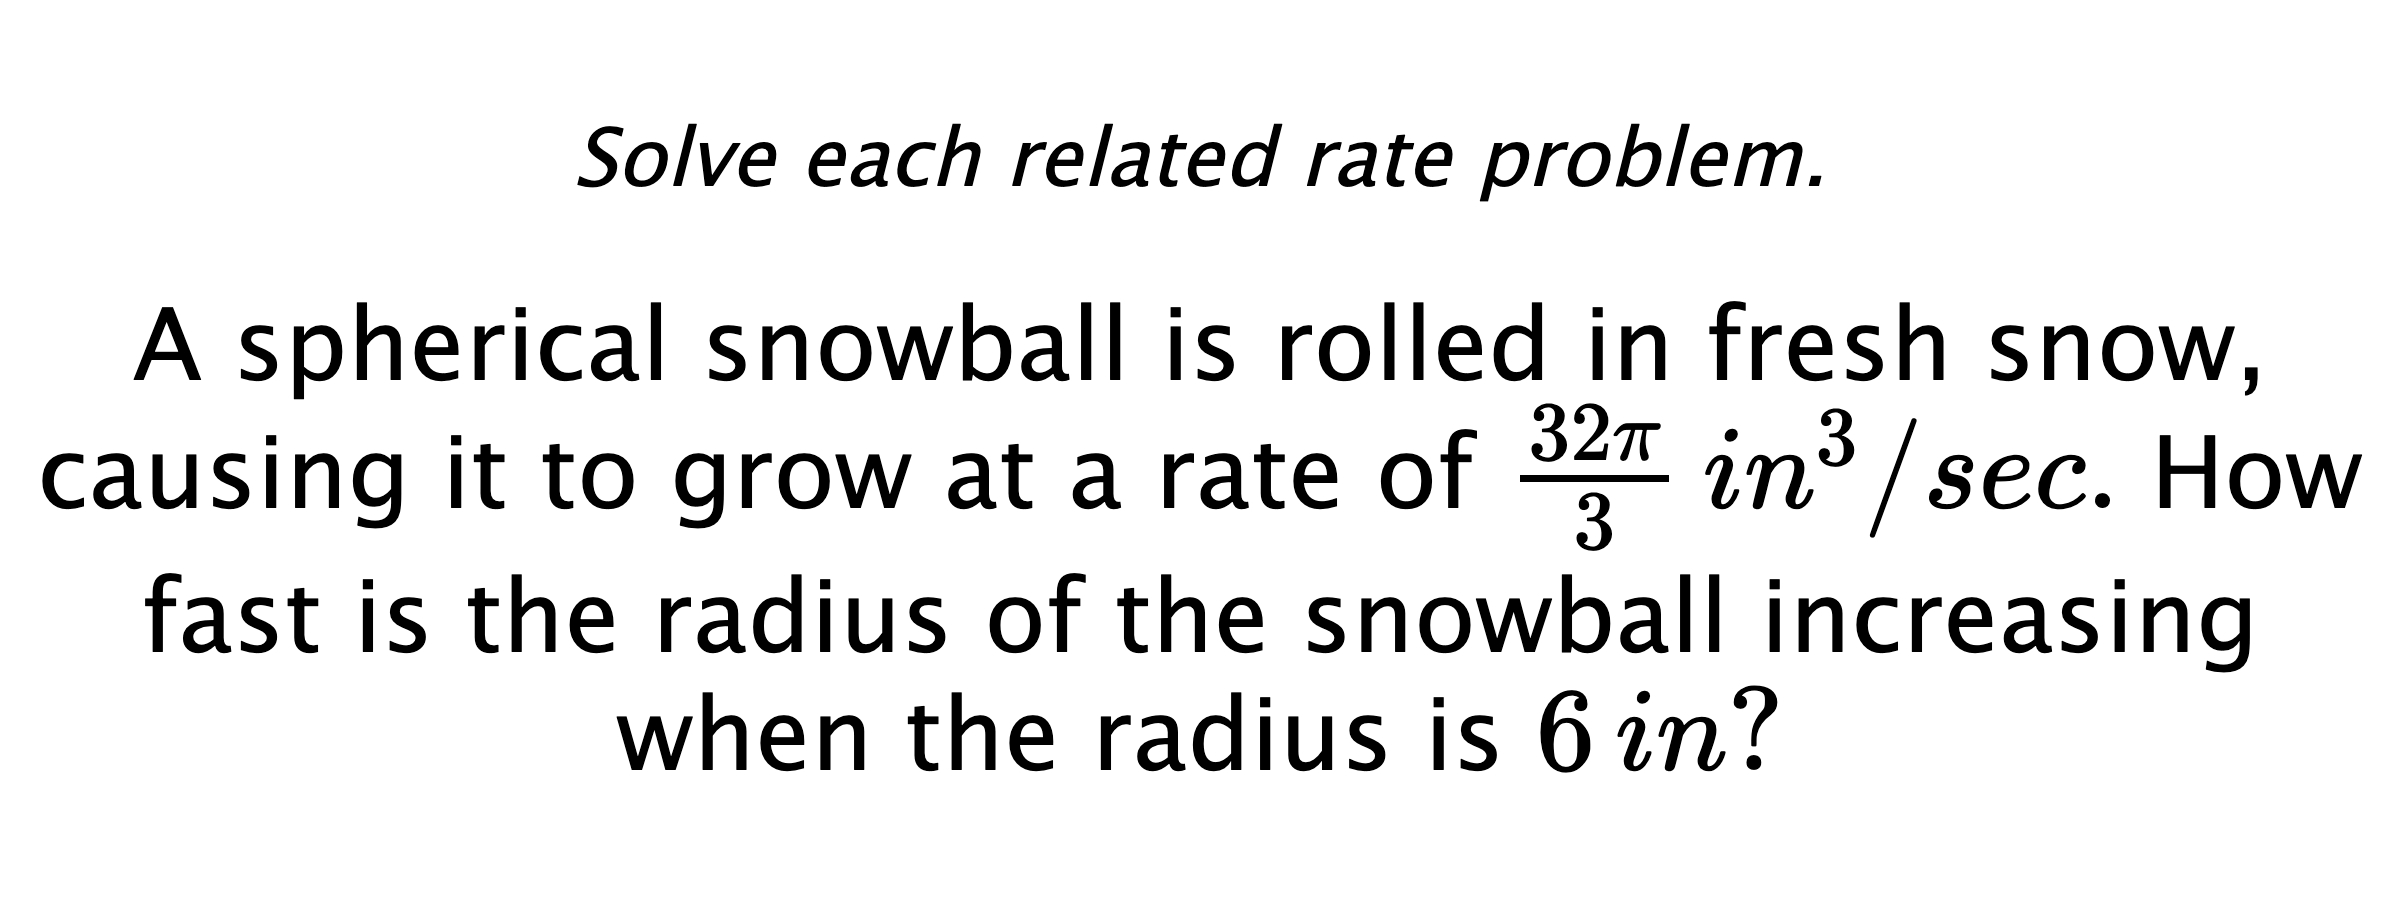 Solve each related rate problem. A spherical snowball is rolled in fresh snow, causing it to grow at a rate of $\frac{32\pi}{3} \,in^{3}/sec.$ How fast is the radius of the snowball increasing when the radius is $6\,in?$